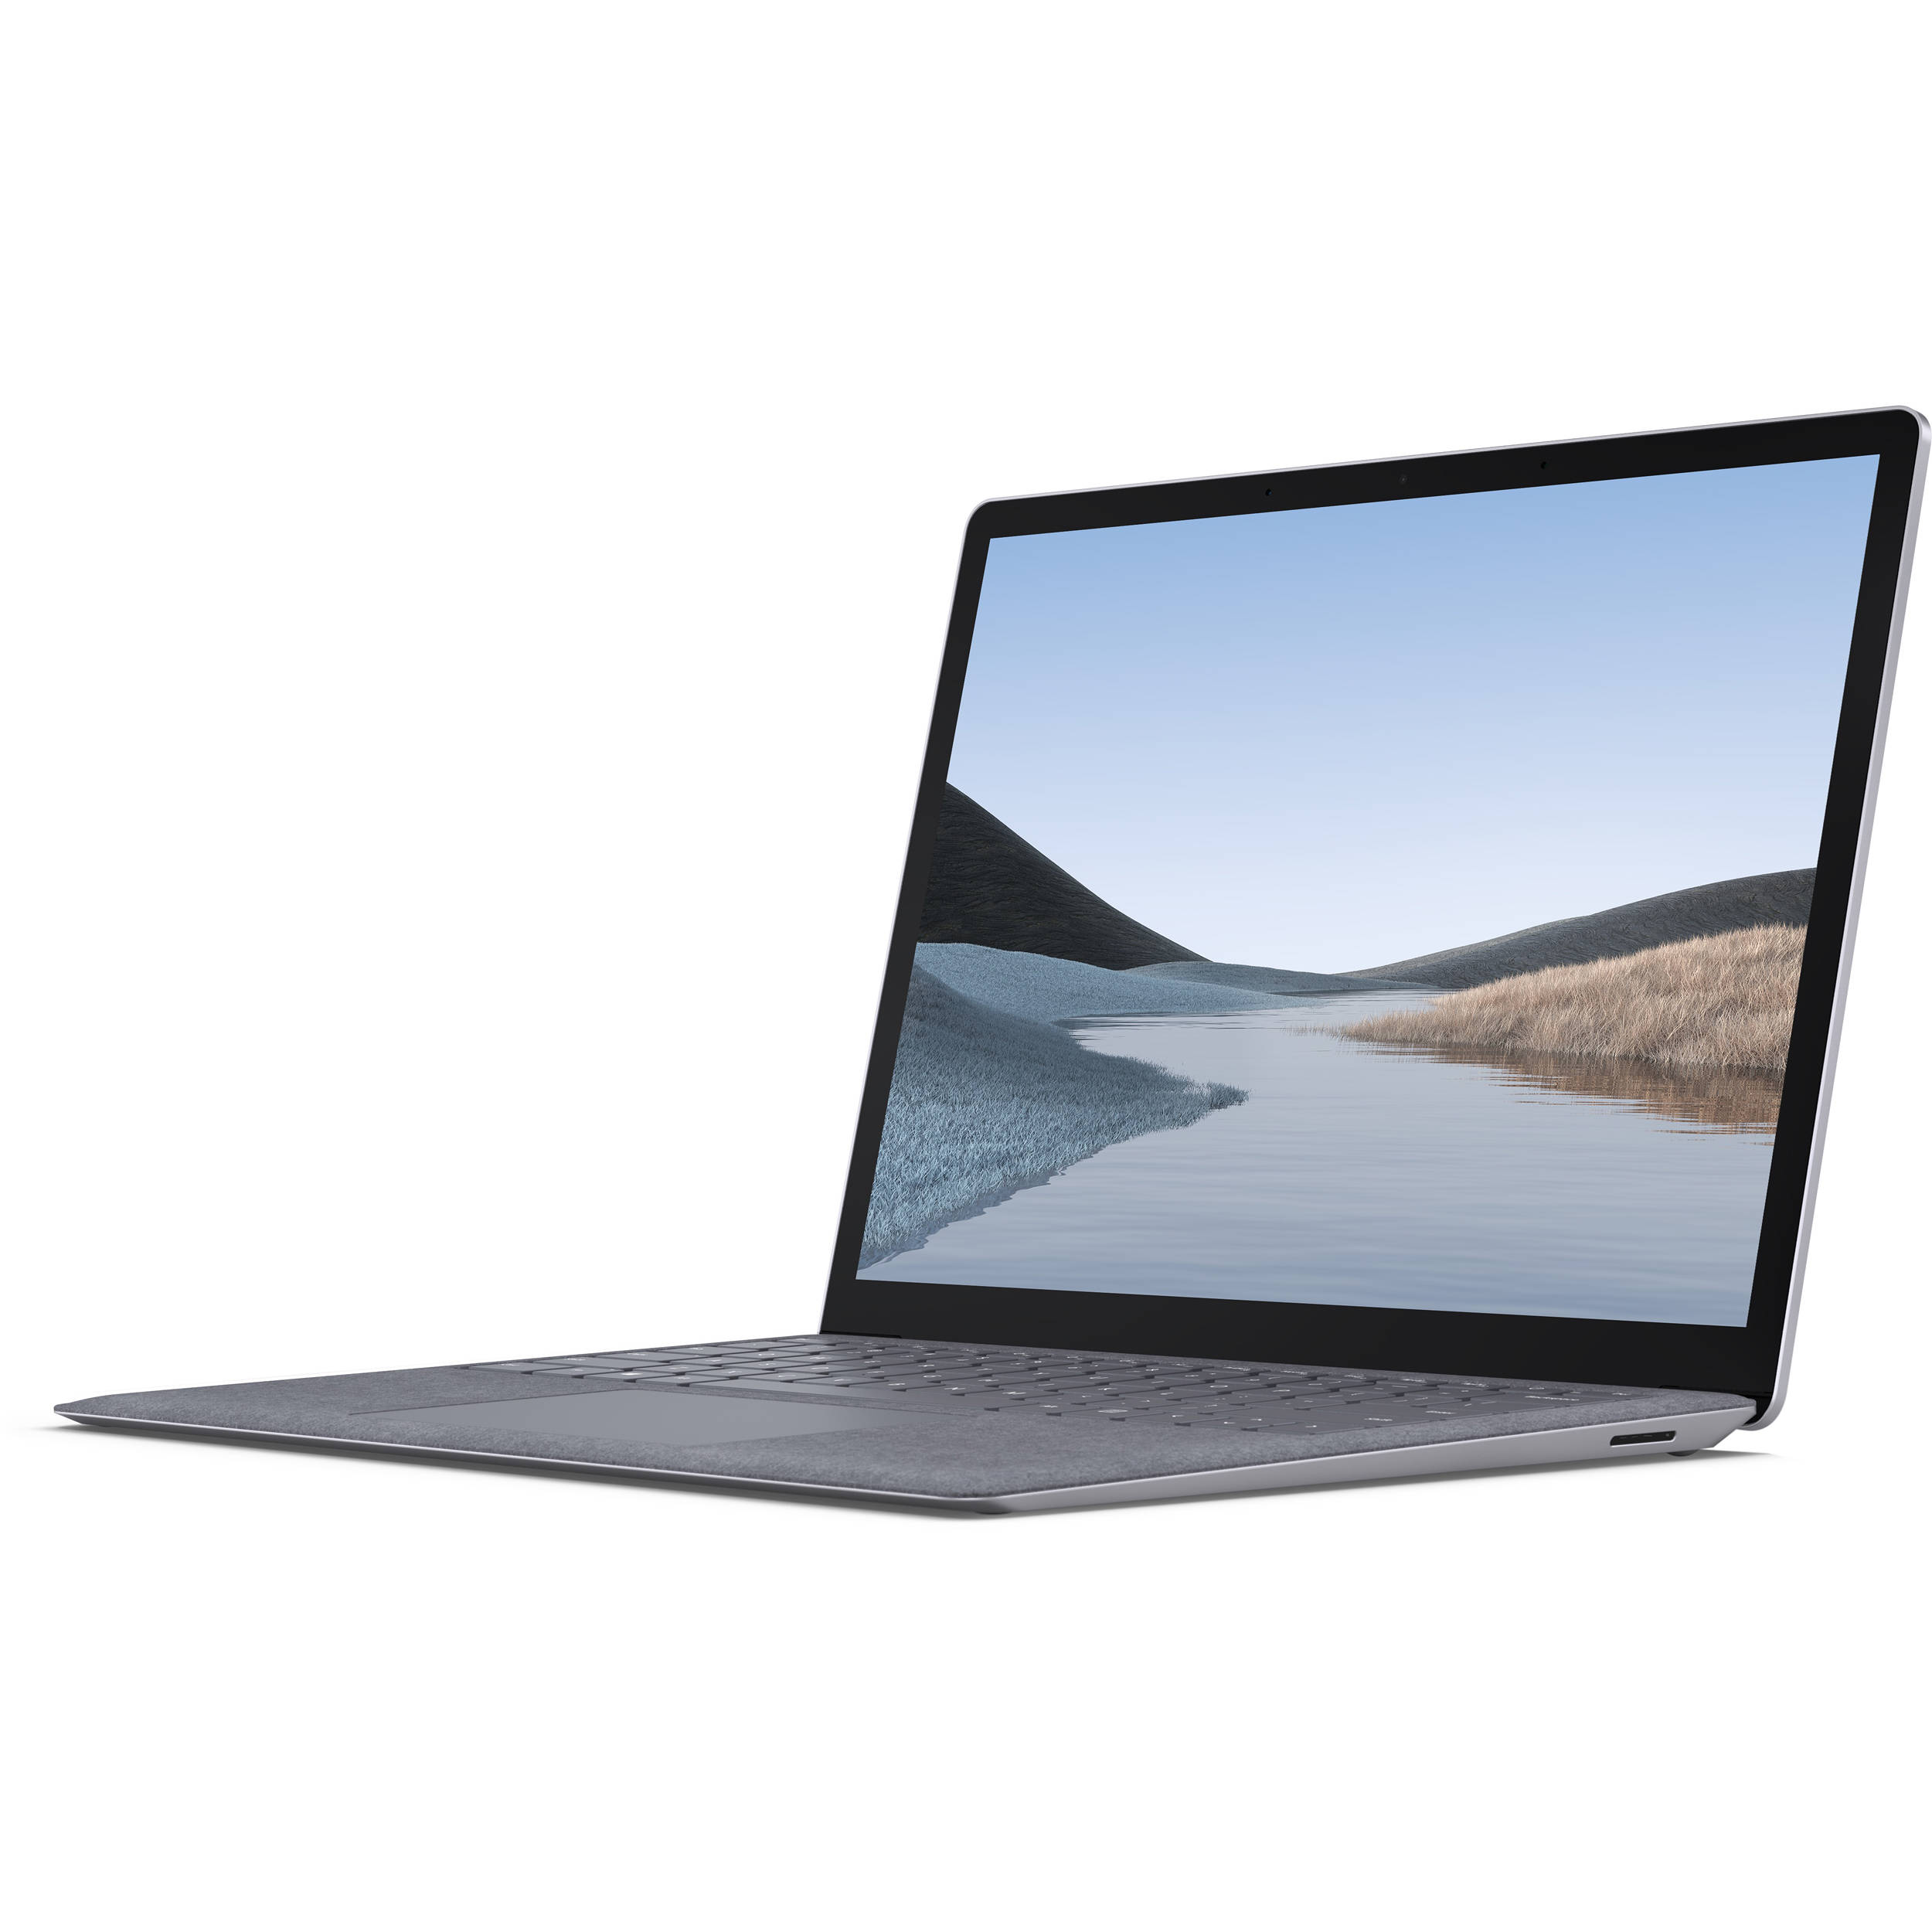 MICROSOFT SURFACE LAPTOP 3 13.5 TOUCH-SCREEN INTEL CORE I7 16GB MEMORY  256GB SOLID STATE DRIVE (LATEST MODEL) PLATINUM